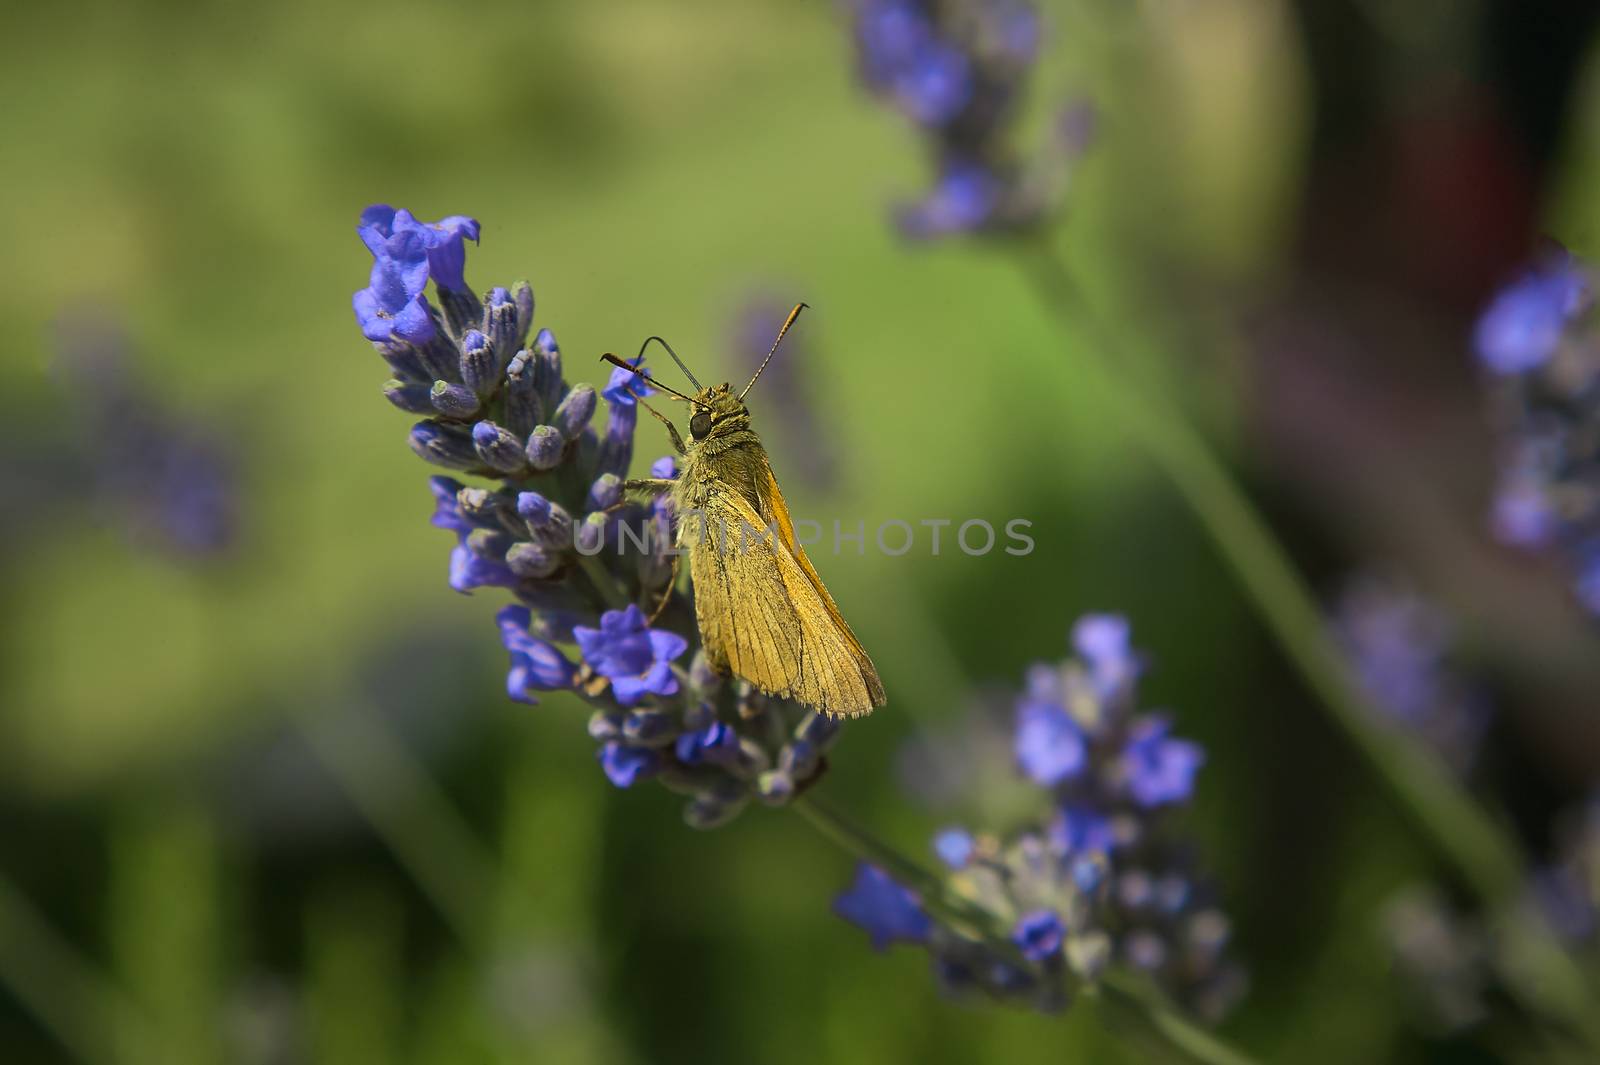 Small Moth resting on lavender flower shooting in a macro shot with surprising details.